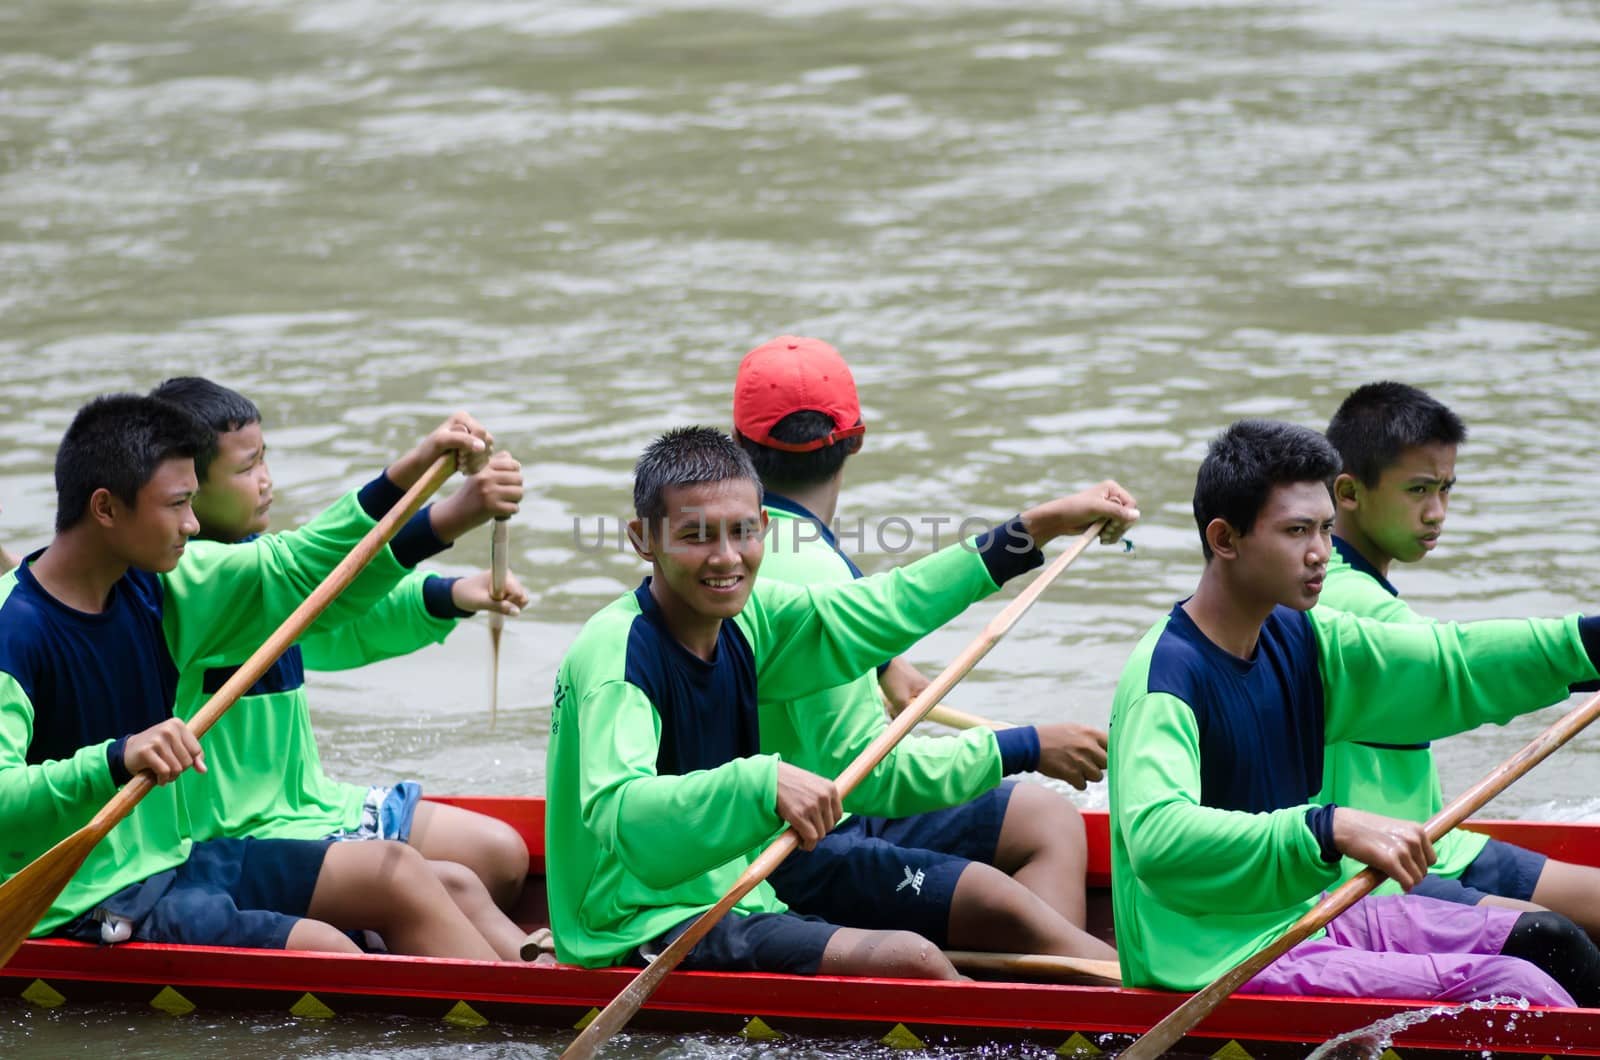 Petchaburi, THAILAND - October 7 : Participants in the Petchaburi Long Boat Competition 2012 on October 7, 2012 in The Petchaburi river ,Petchaburi Province, Thailand. 